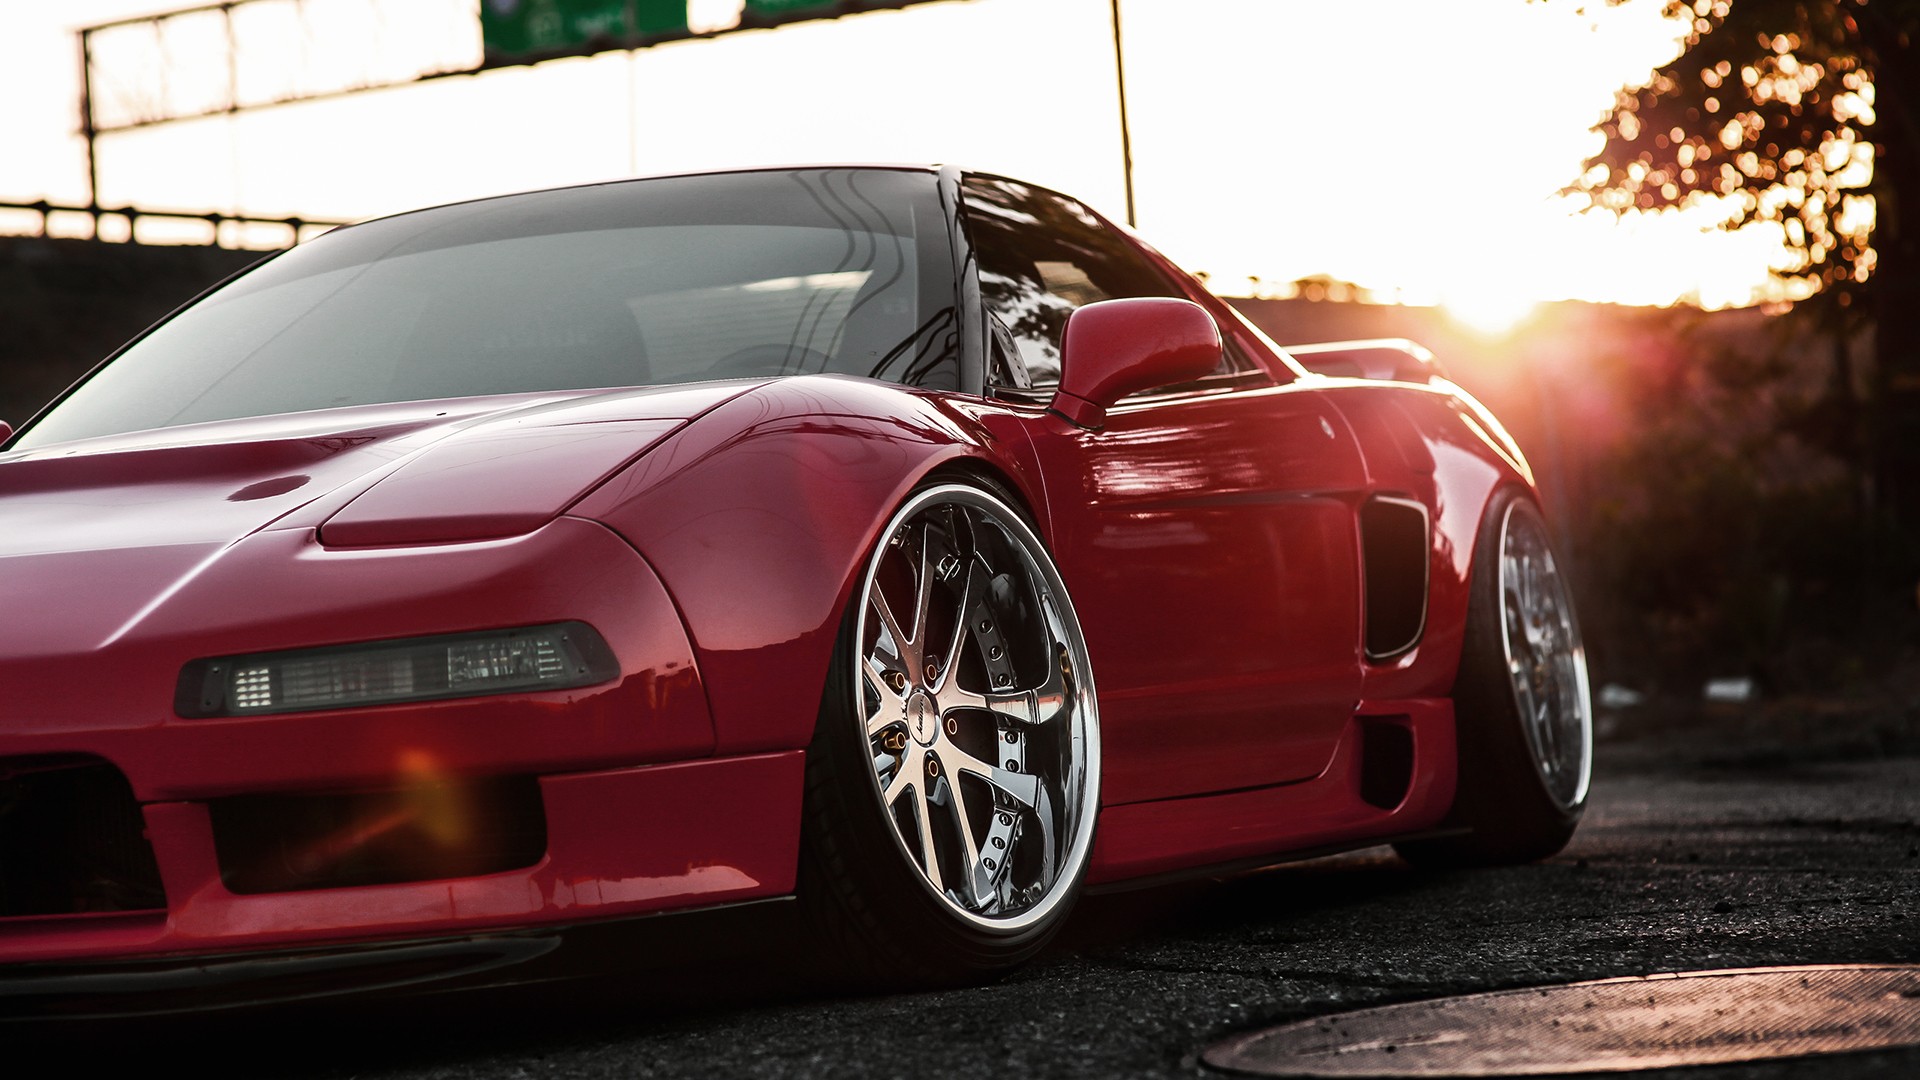 Honda, Nsx Wallpapers HD / Desktop and Mobile Backgrounds